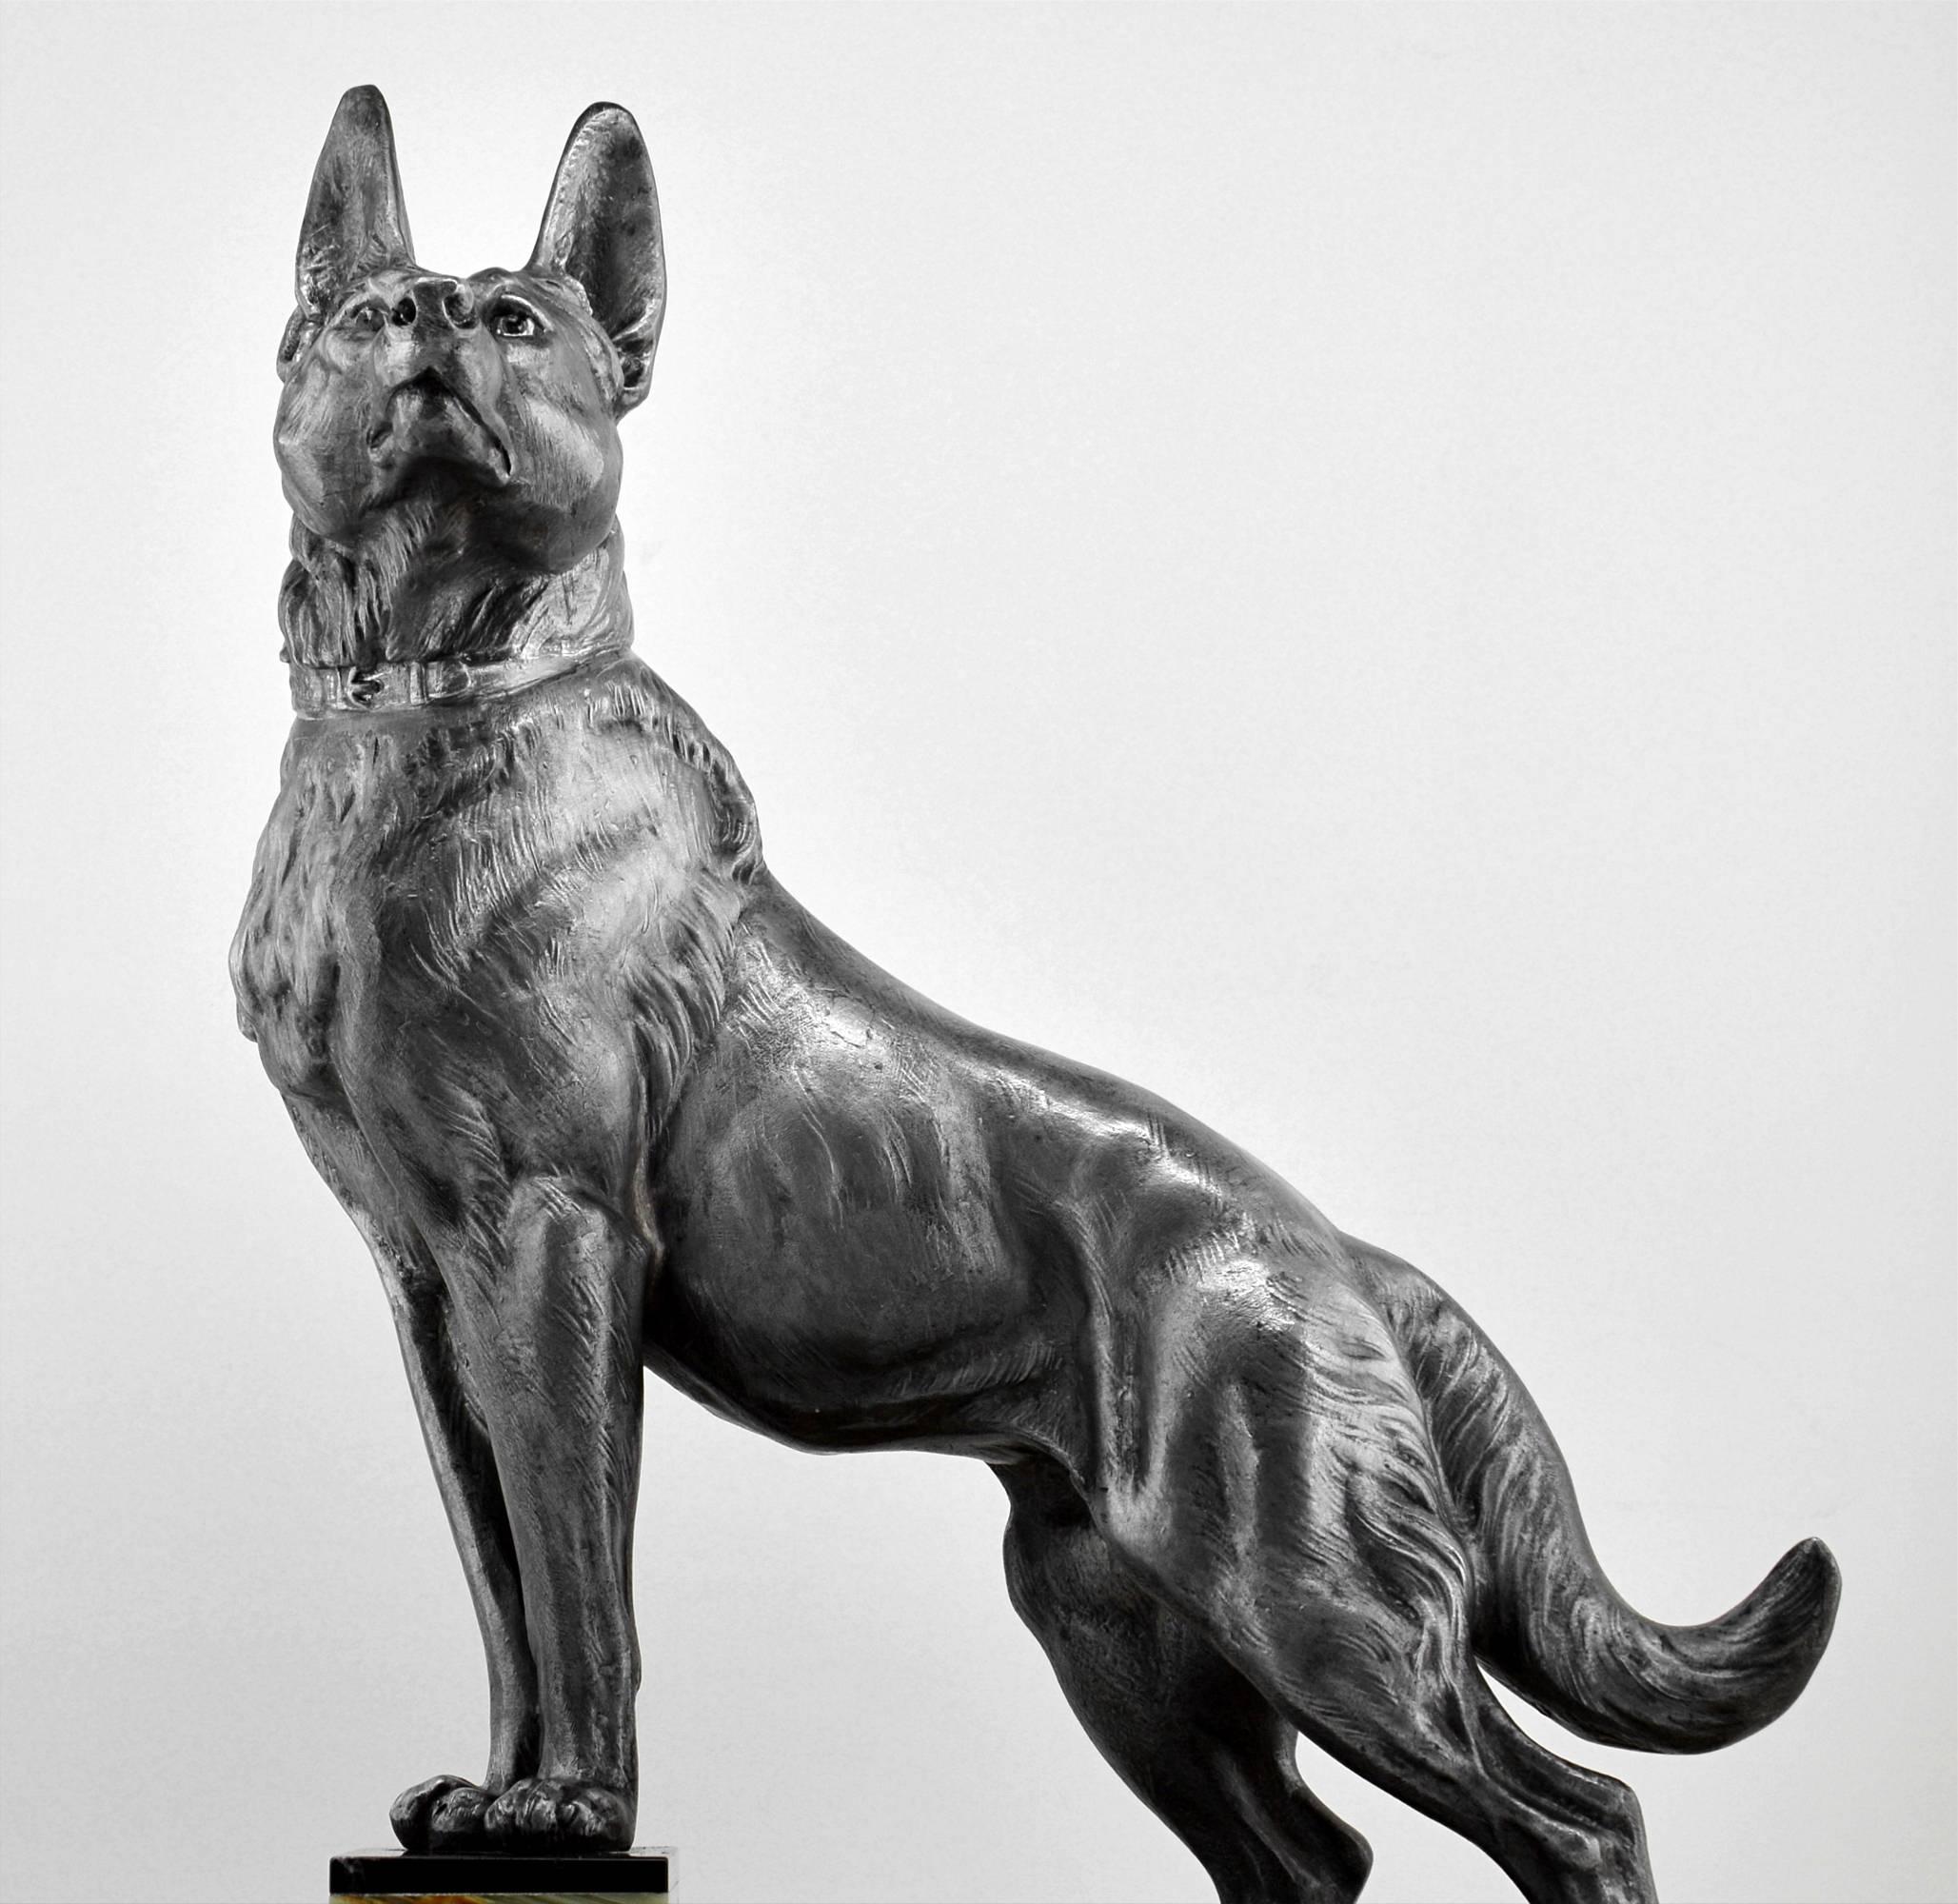 Large French Art Deco German Shepherd sculpture, circa 1930. The dog is made of raw spelter. He stands on a refined marble base with stairs. Signed 